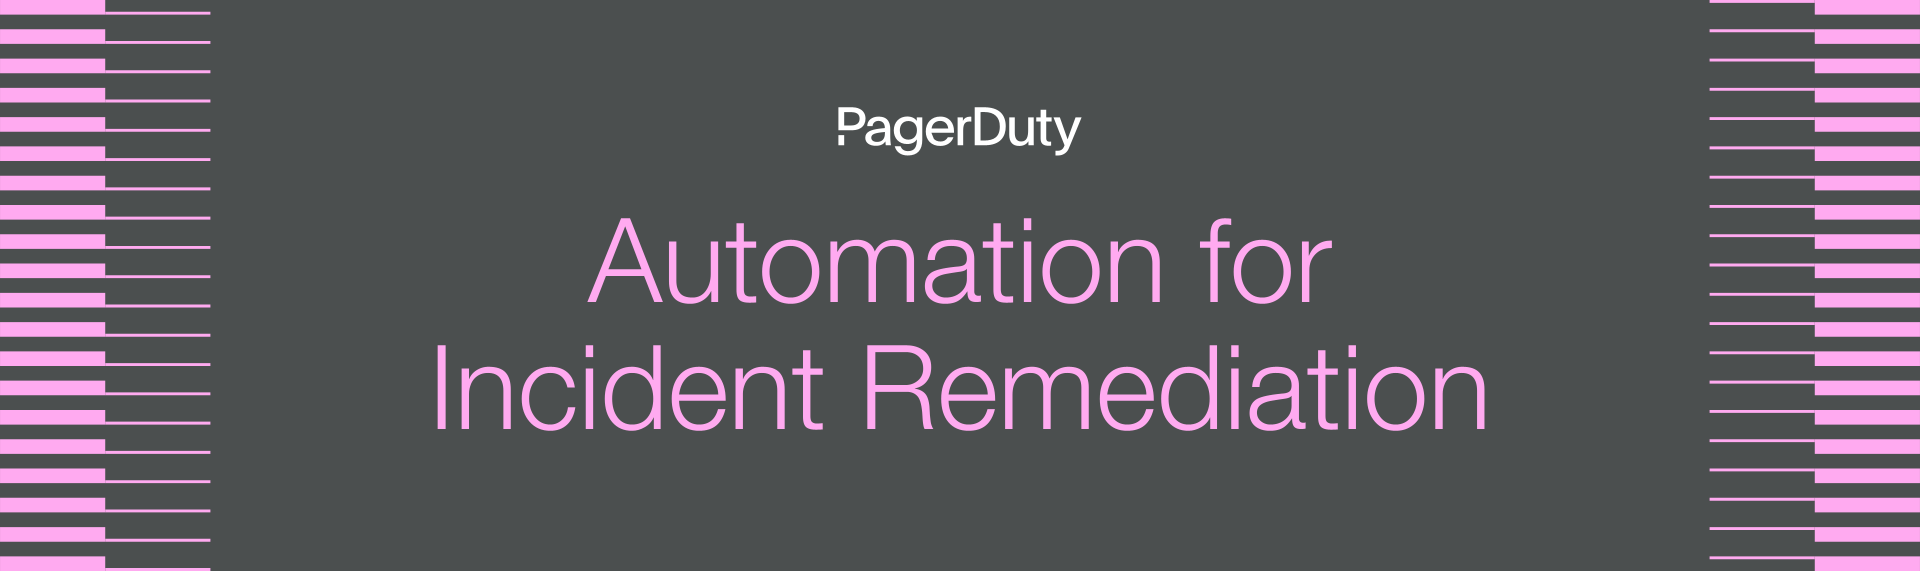 Automation for Incident Remediation